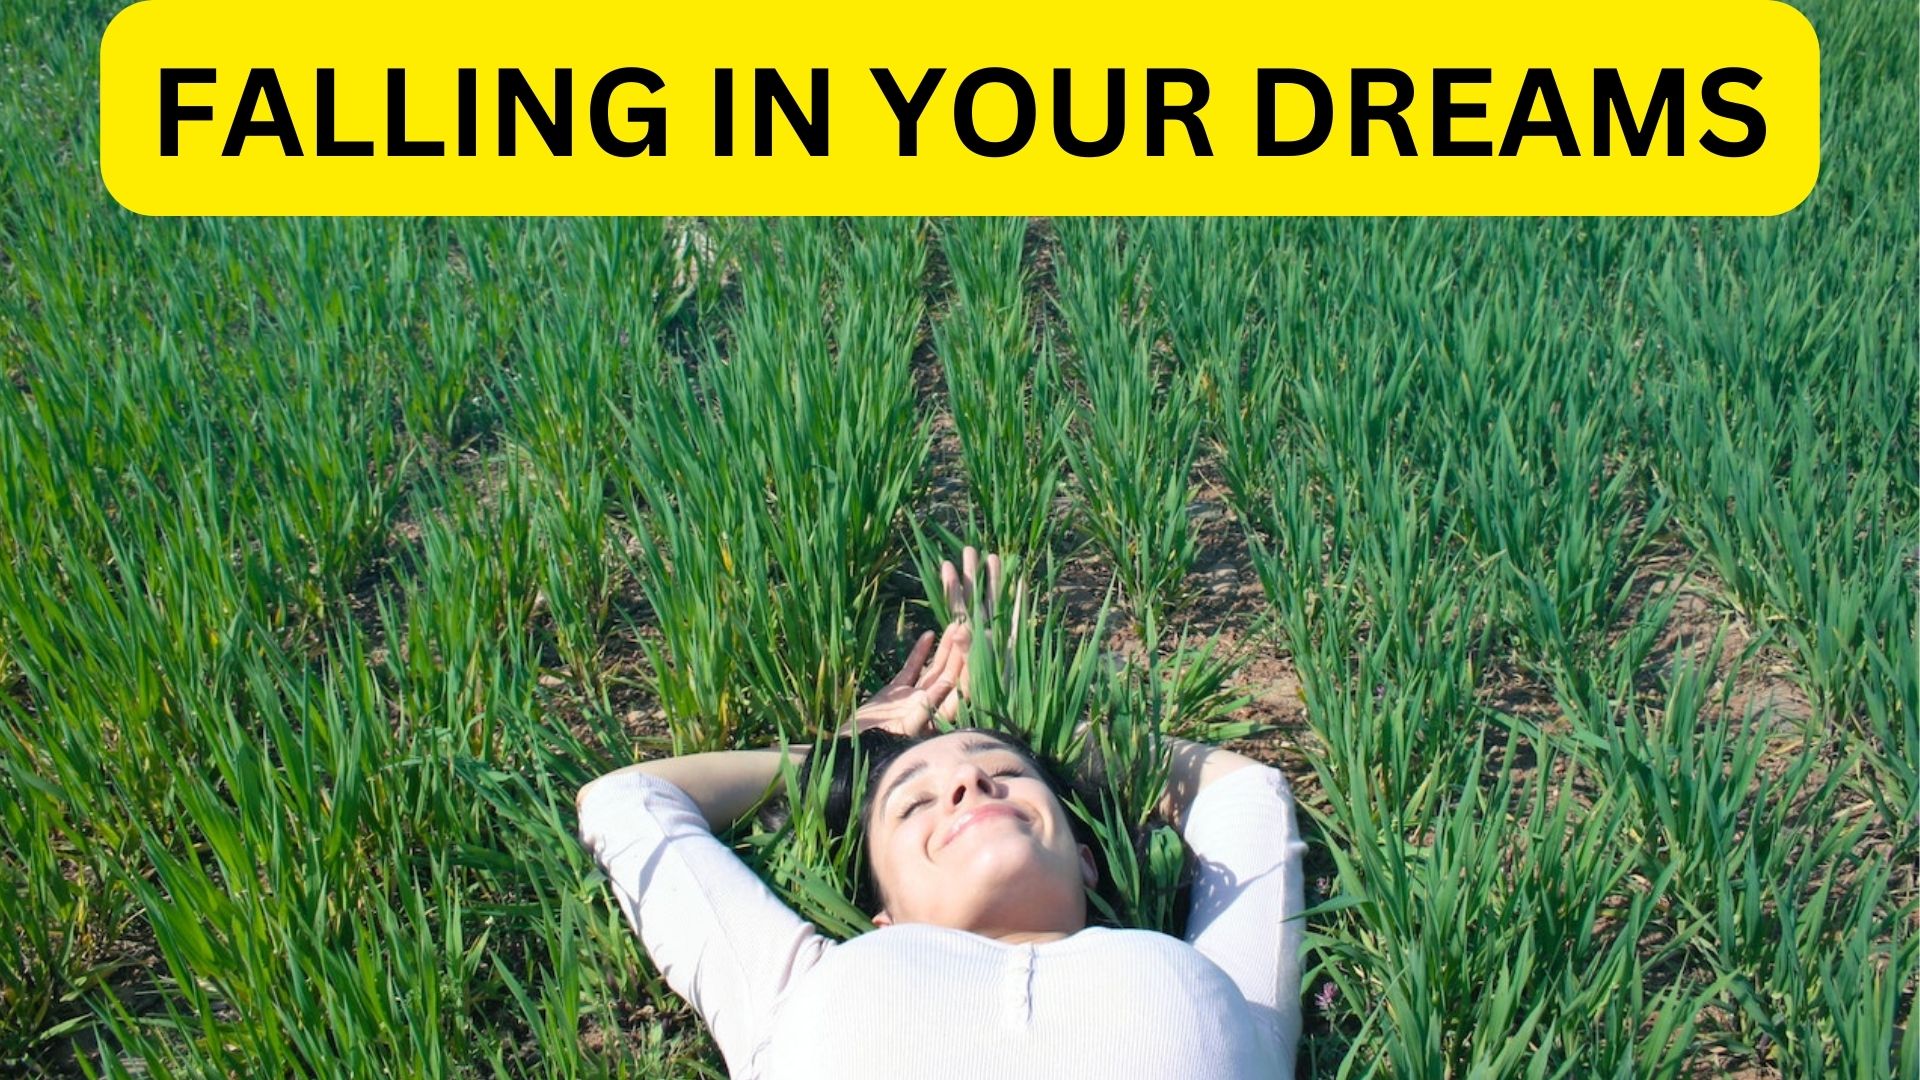 Falling In Your Dreams - Reflect Feelings Of Fear, Anxiety, Or Betrayal